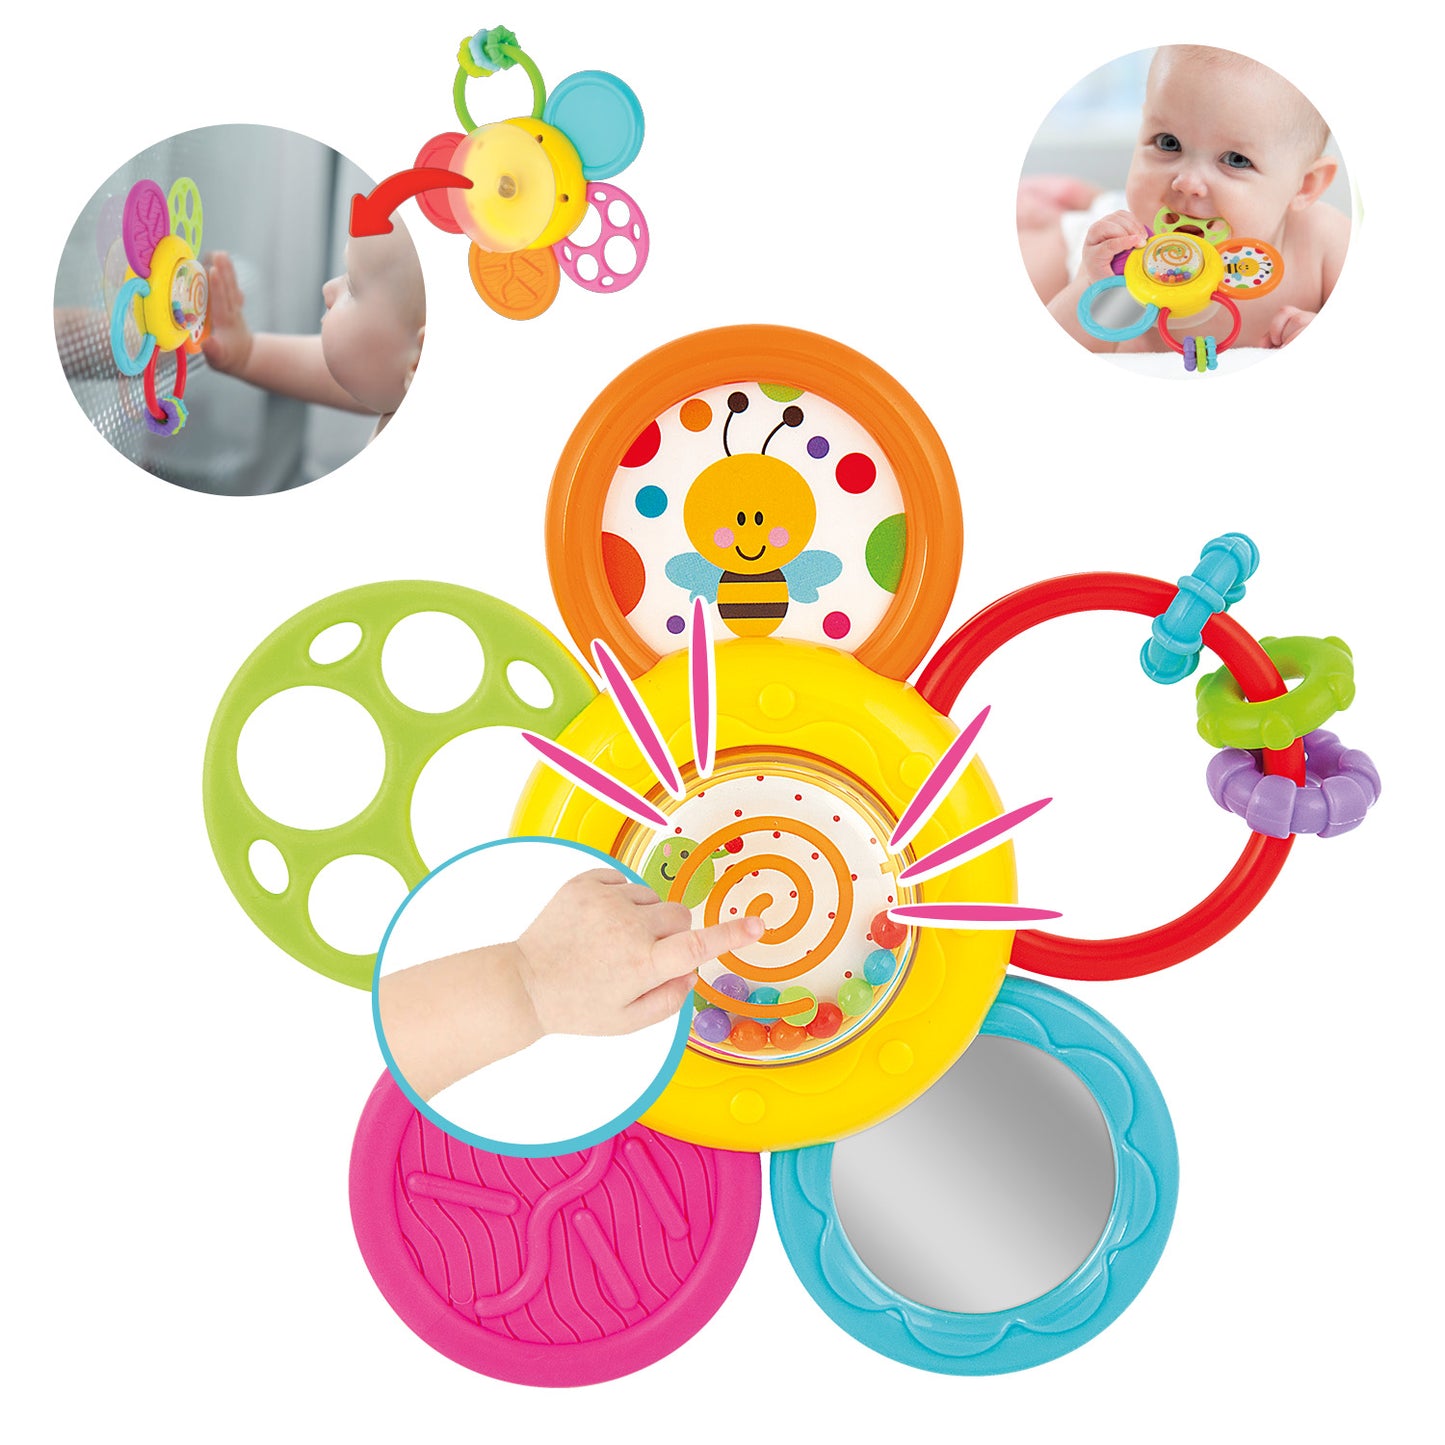 Spin & Rattle Teething Toy: Multi-Activity Toy for Infants 6 Months+